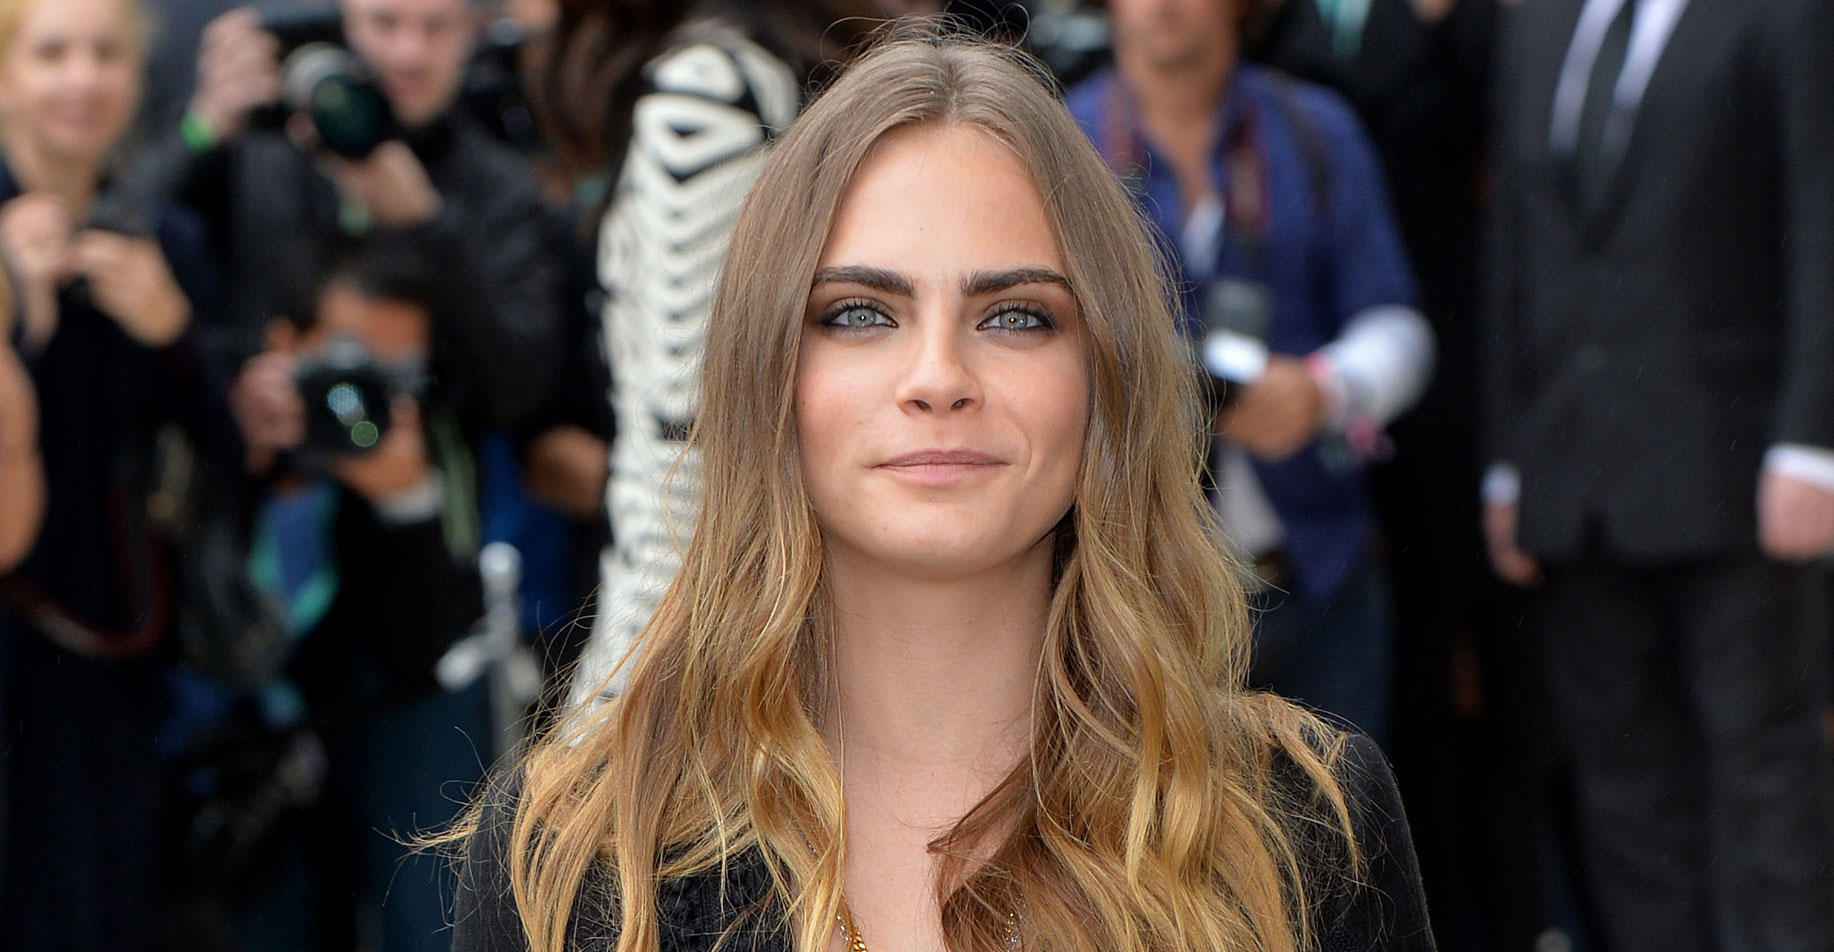 Cara Delevingne Says Getting Approval From Others Isn’t Important ...